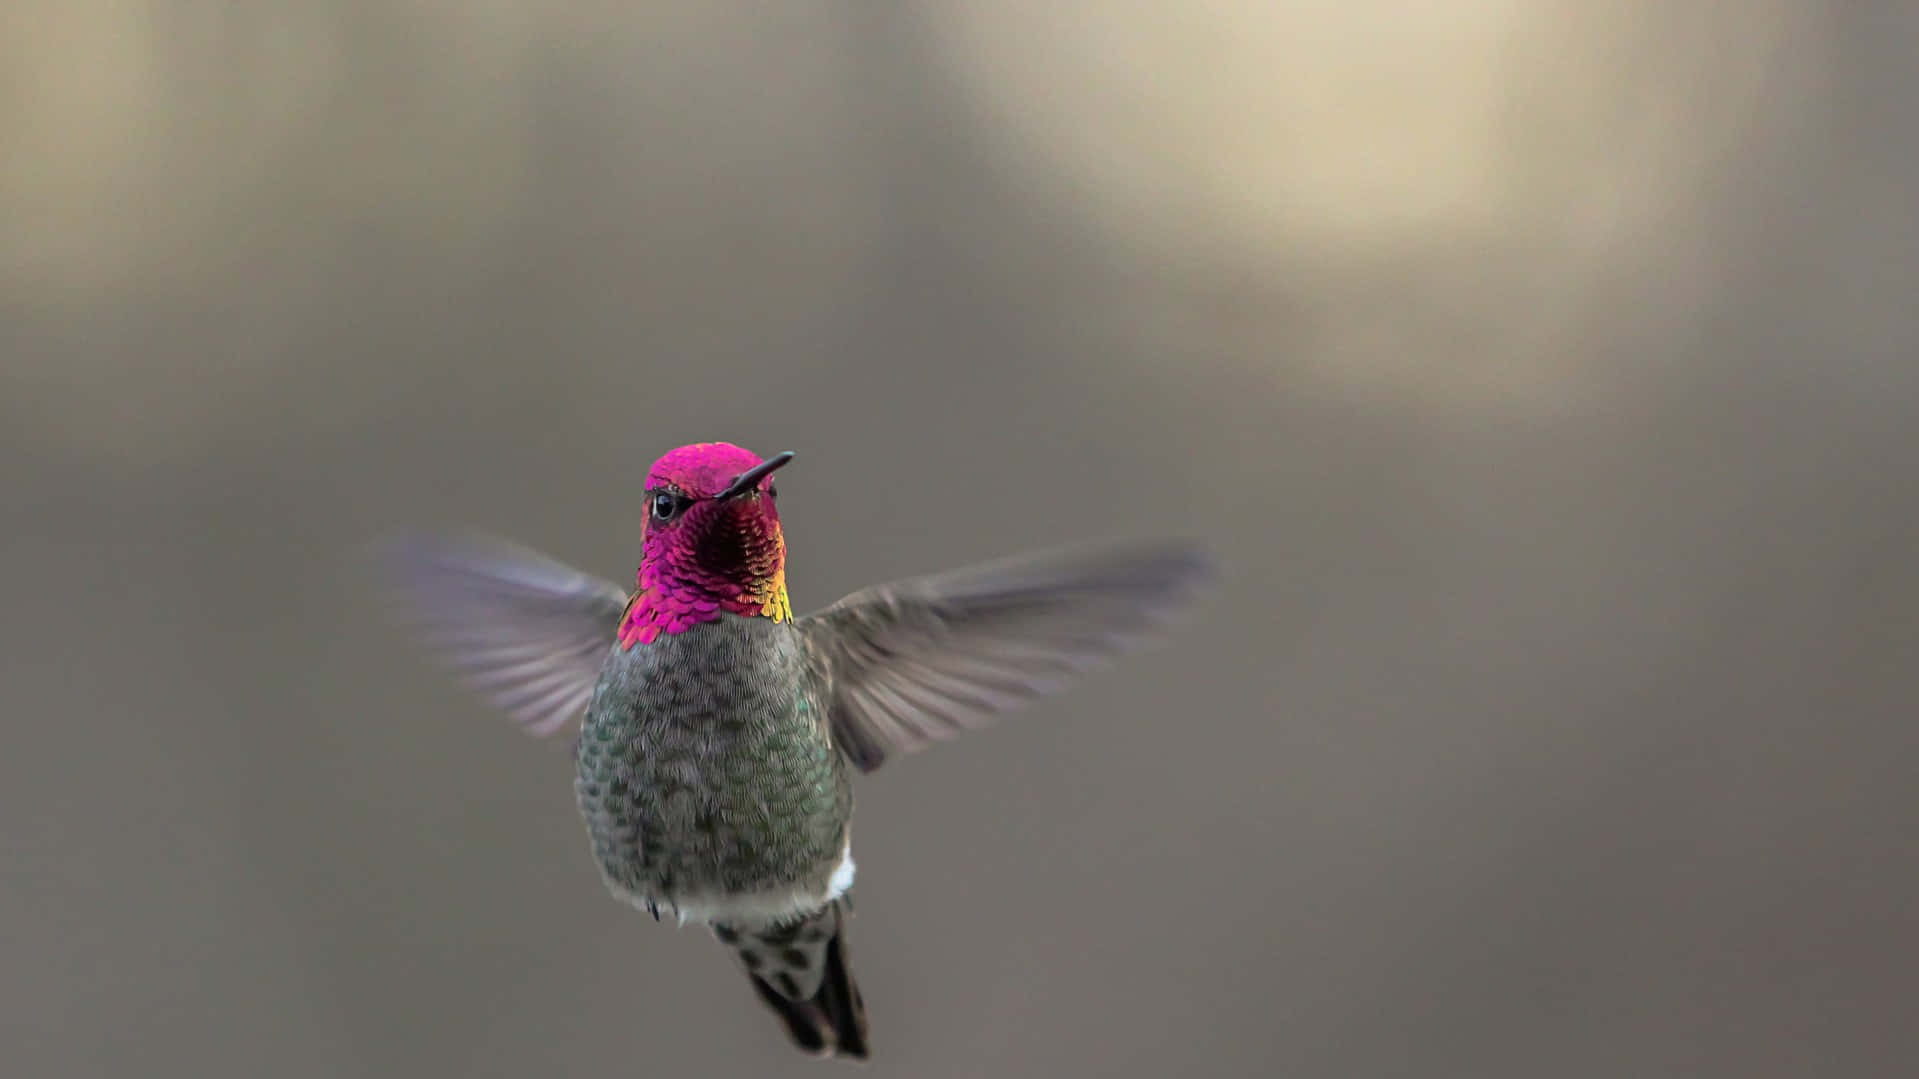 Image  Brightly-colored hummingbird perched atop a flowering landscape